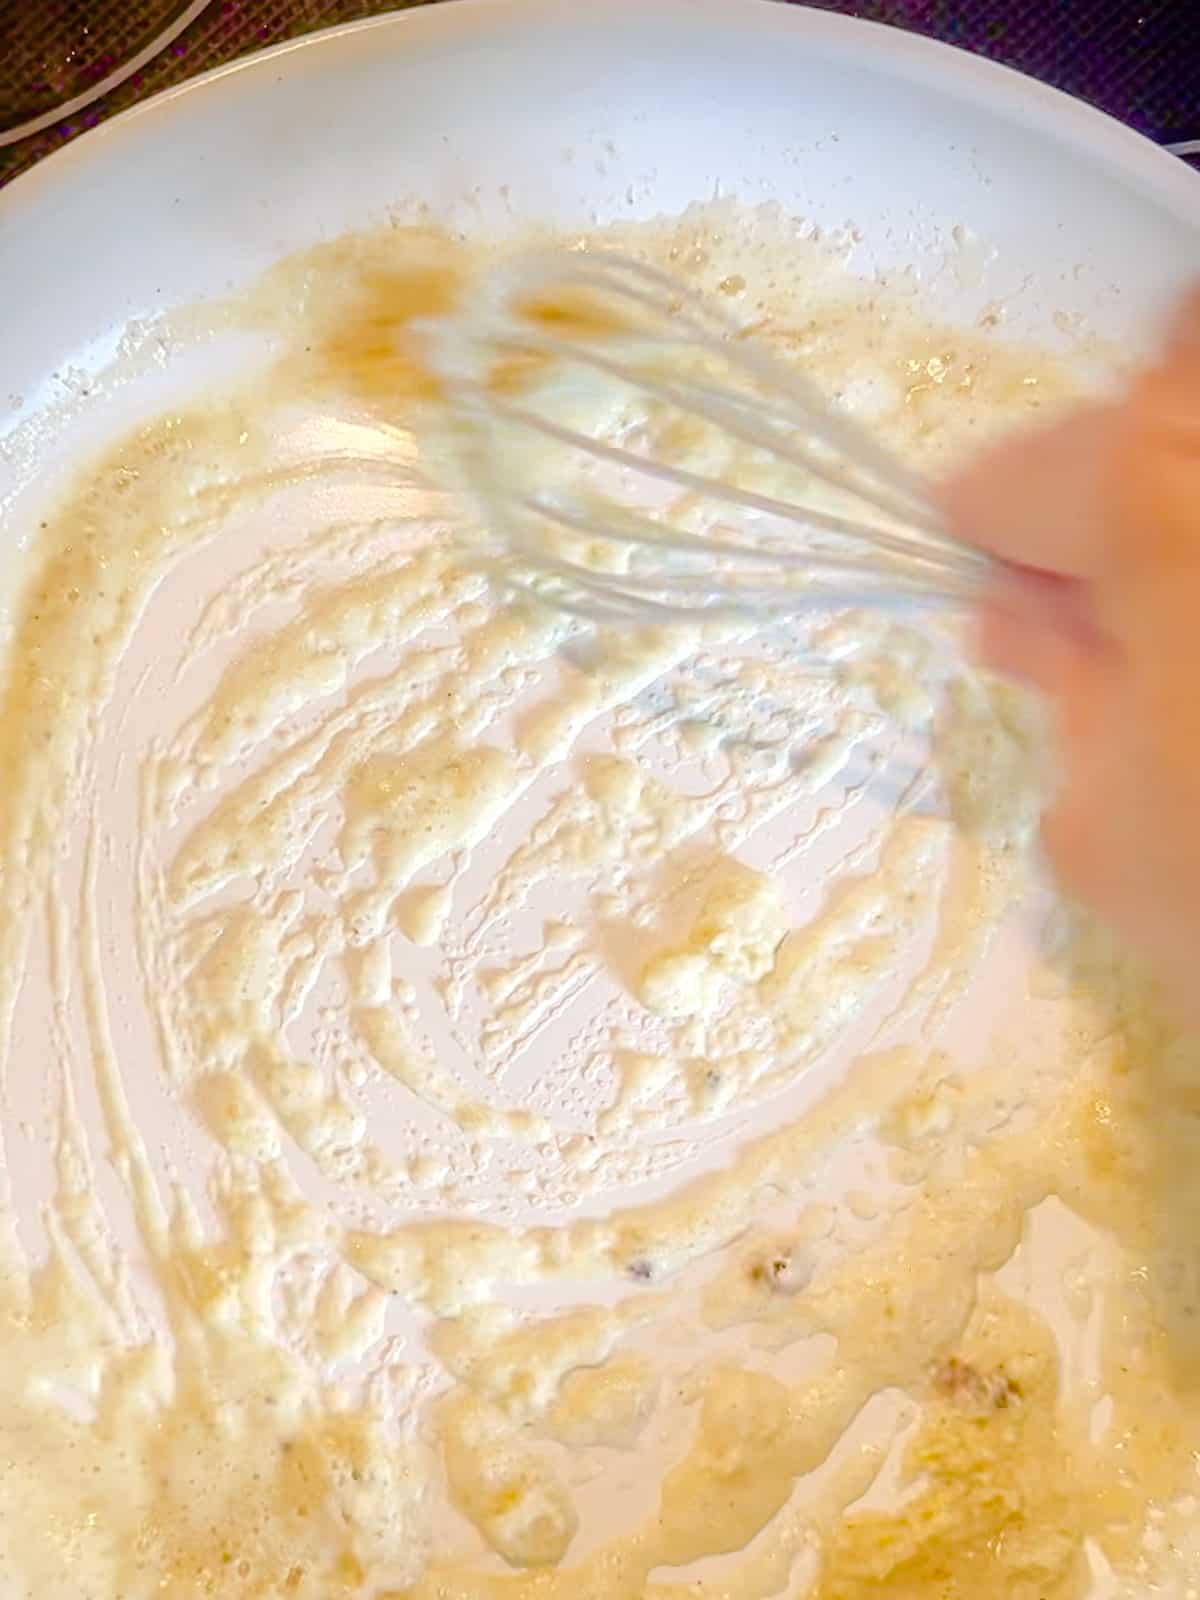 Whisking flour and butter together to make a roux.